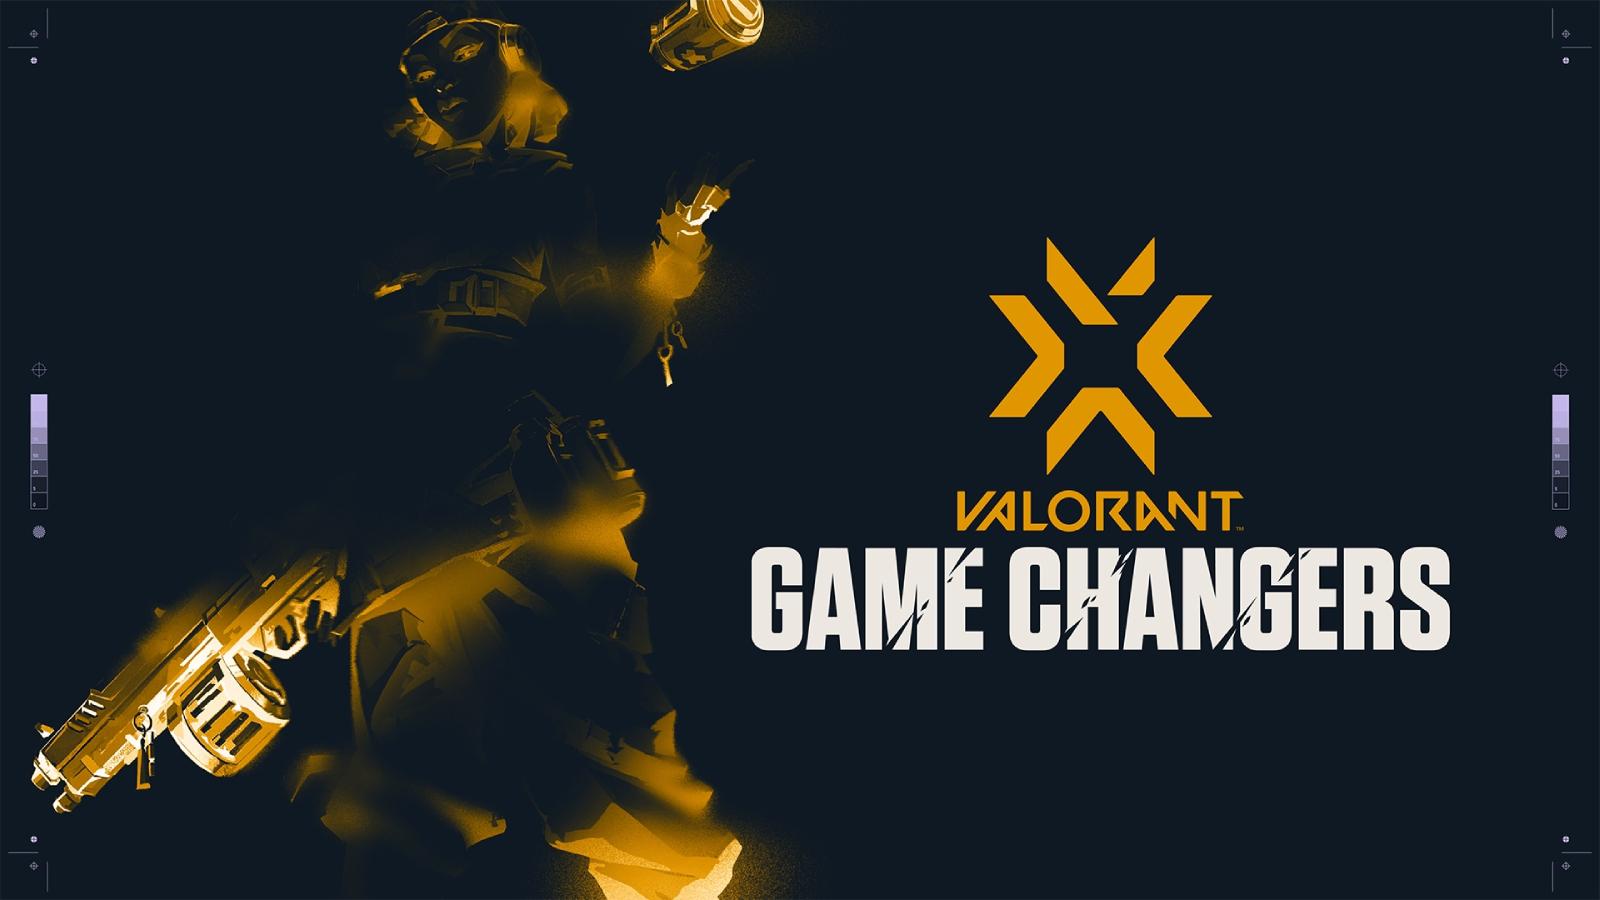 Valorant game changers image